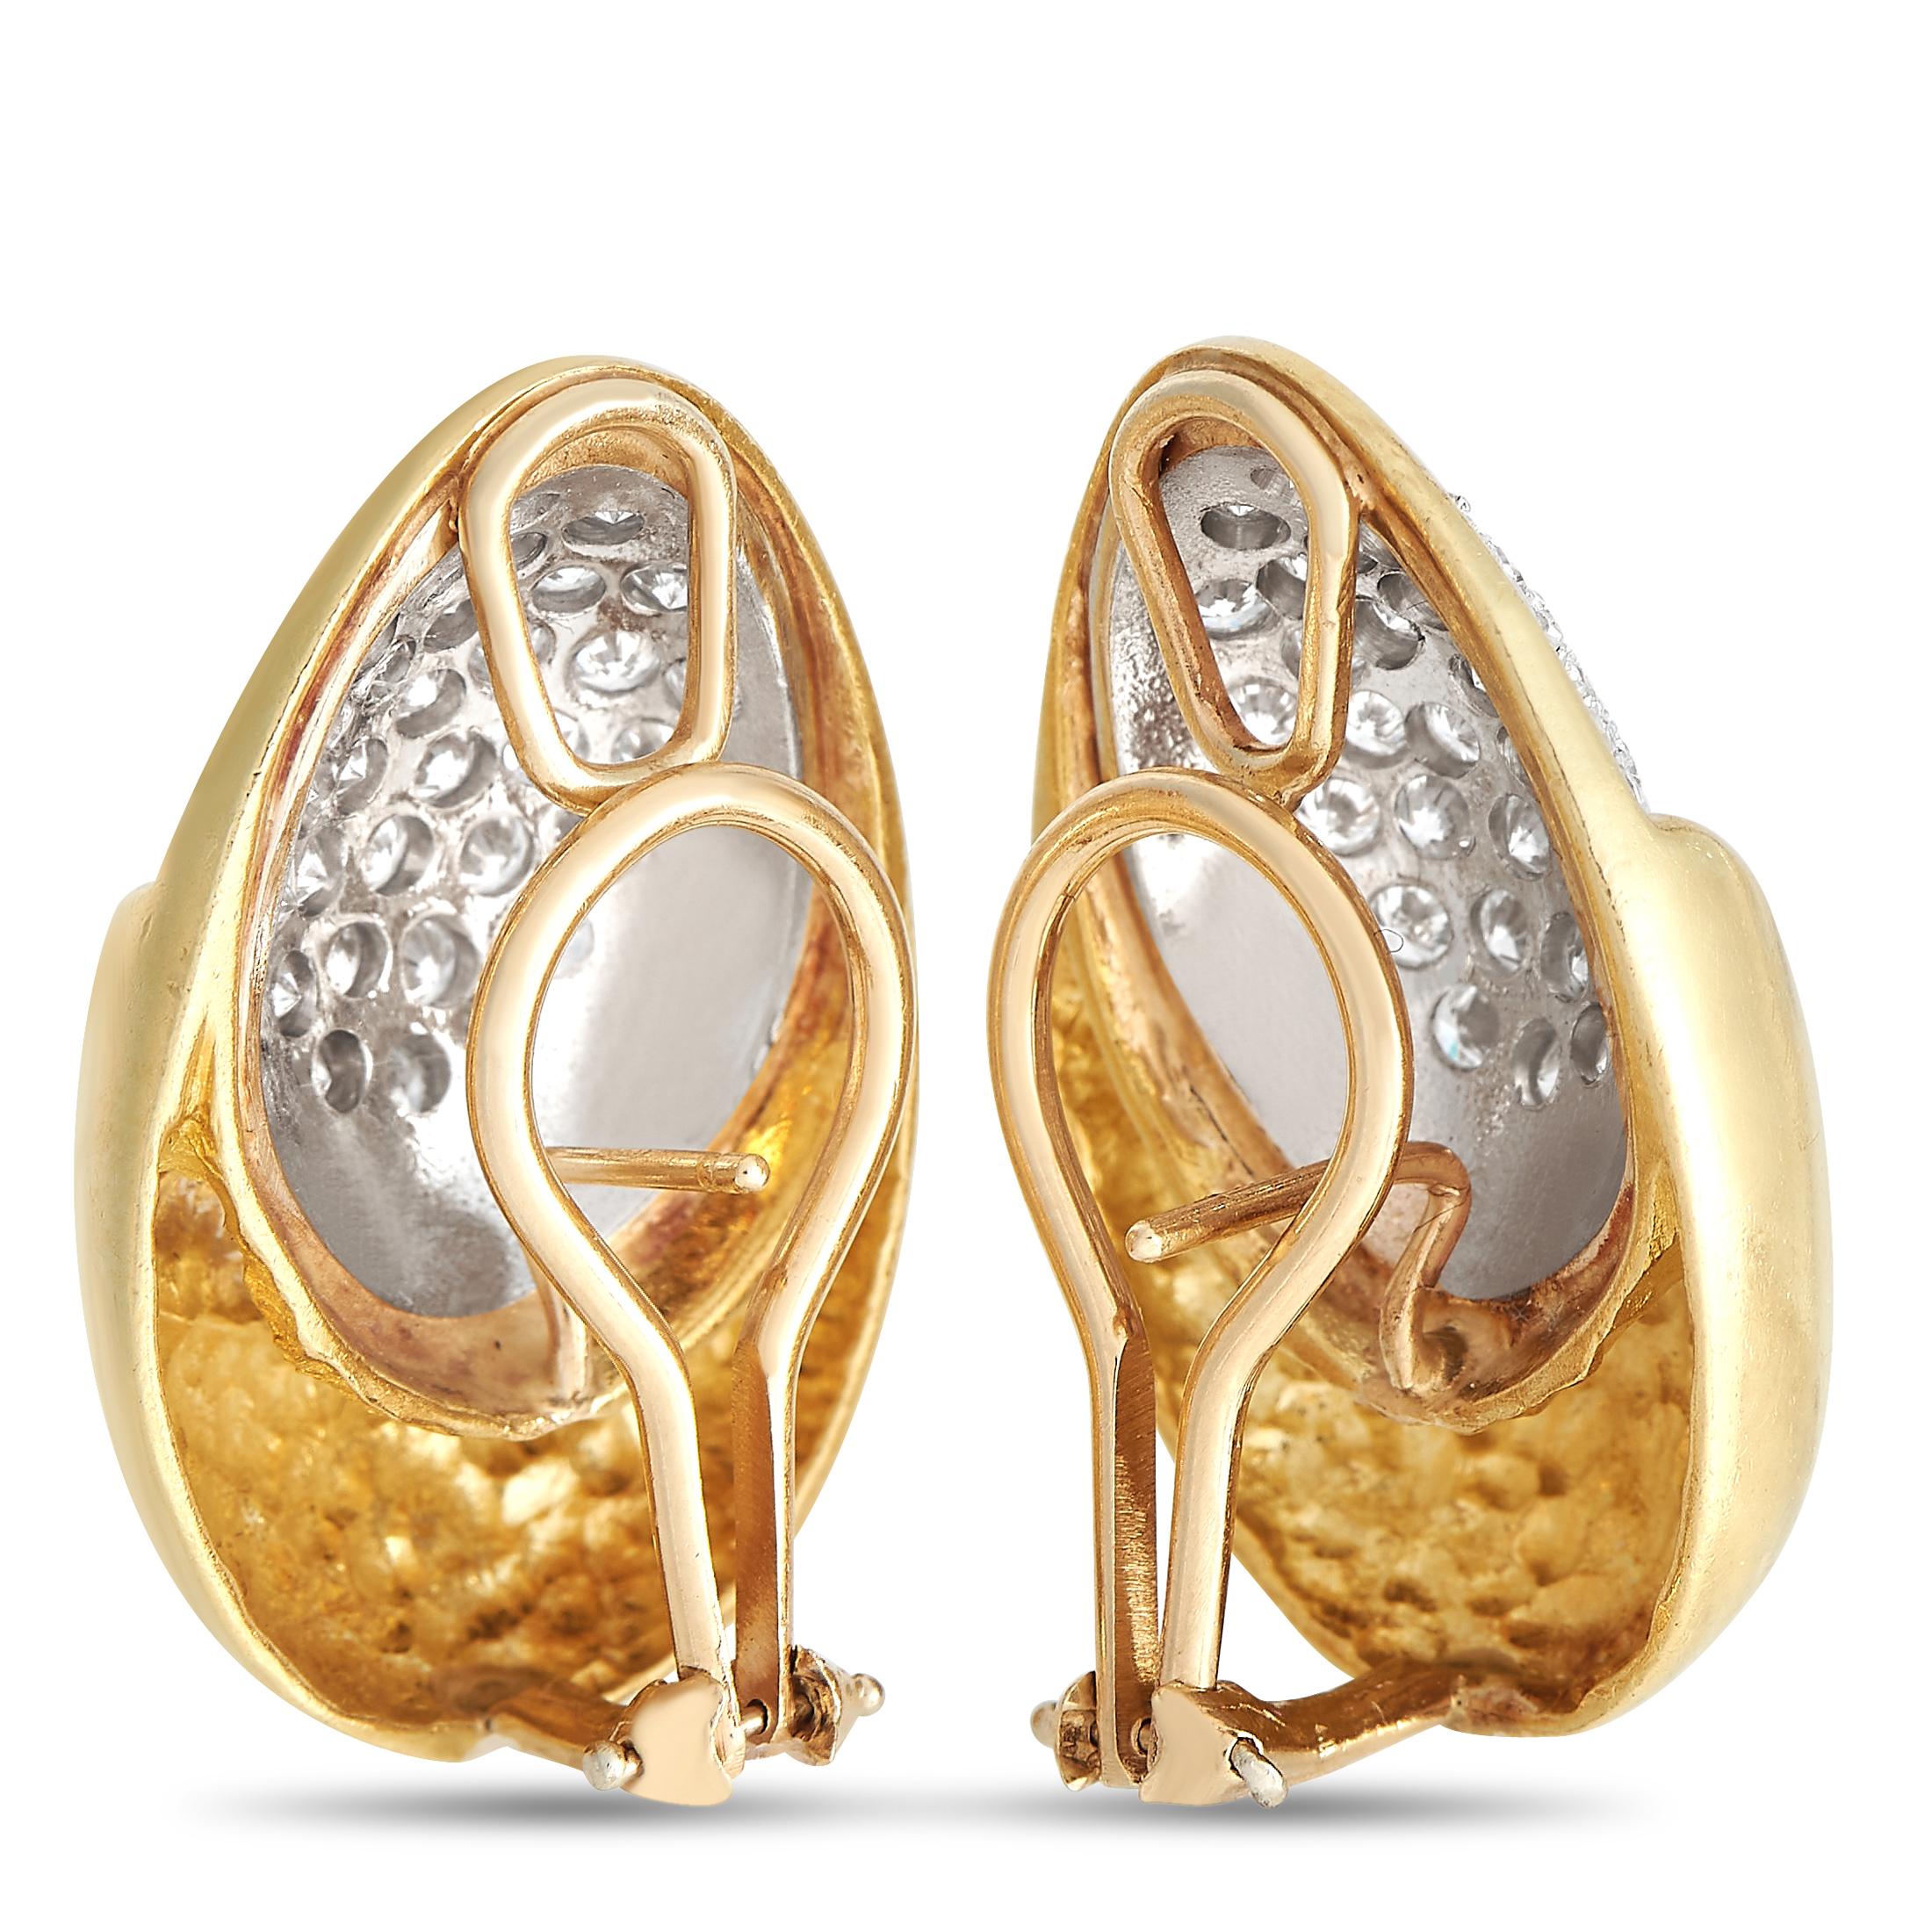 A beautiful, rounded setting crafted from 18K Yellow Gold provides a stunning foundation for these impeccably designed earrings. At their center, a cluster of inset diamonds totaling 3.0 carats allows them to radiate light along with every movement.